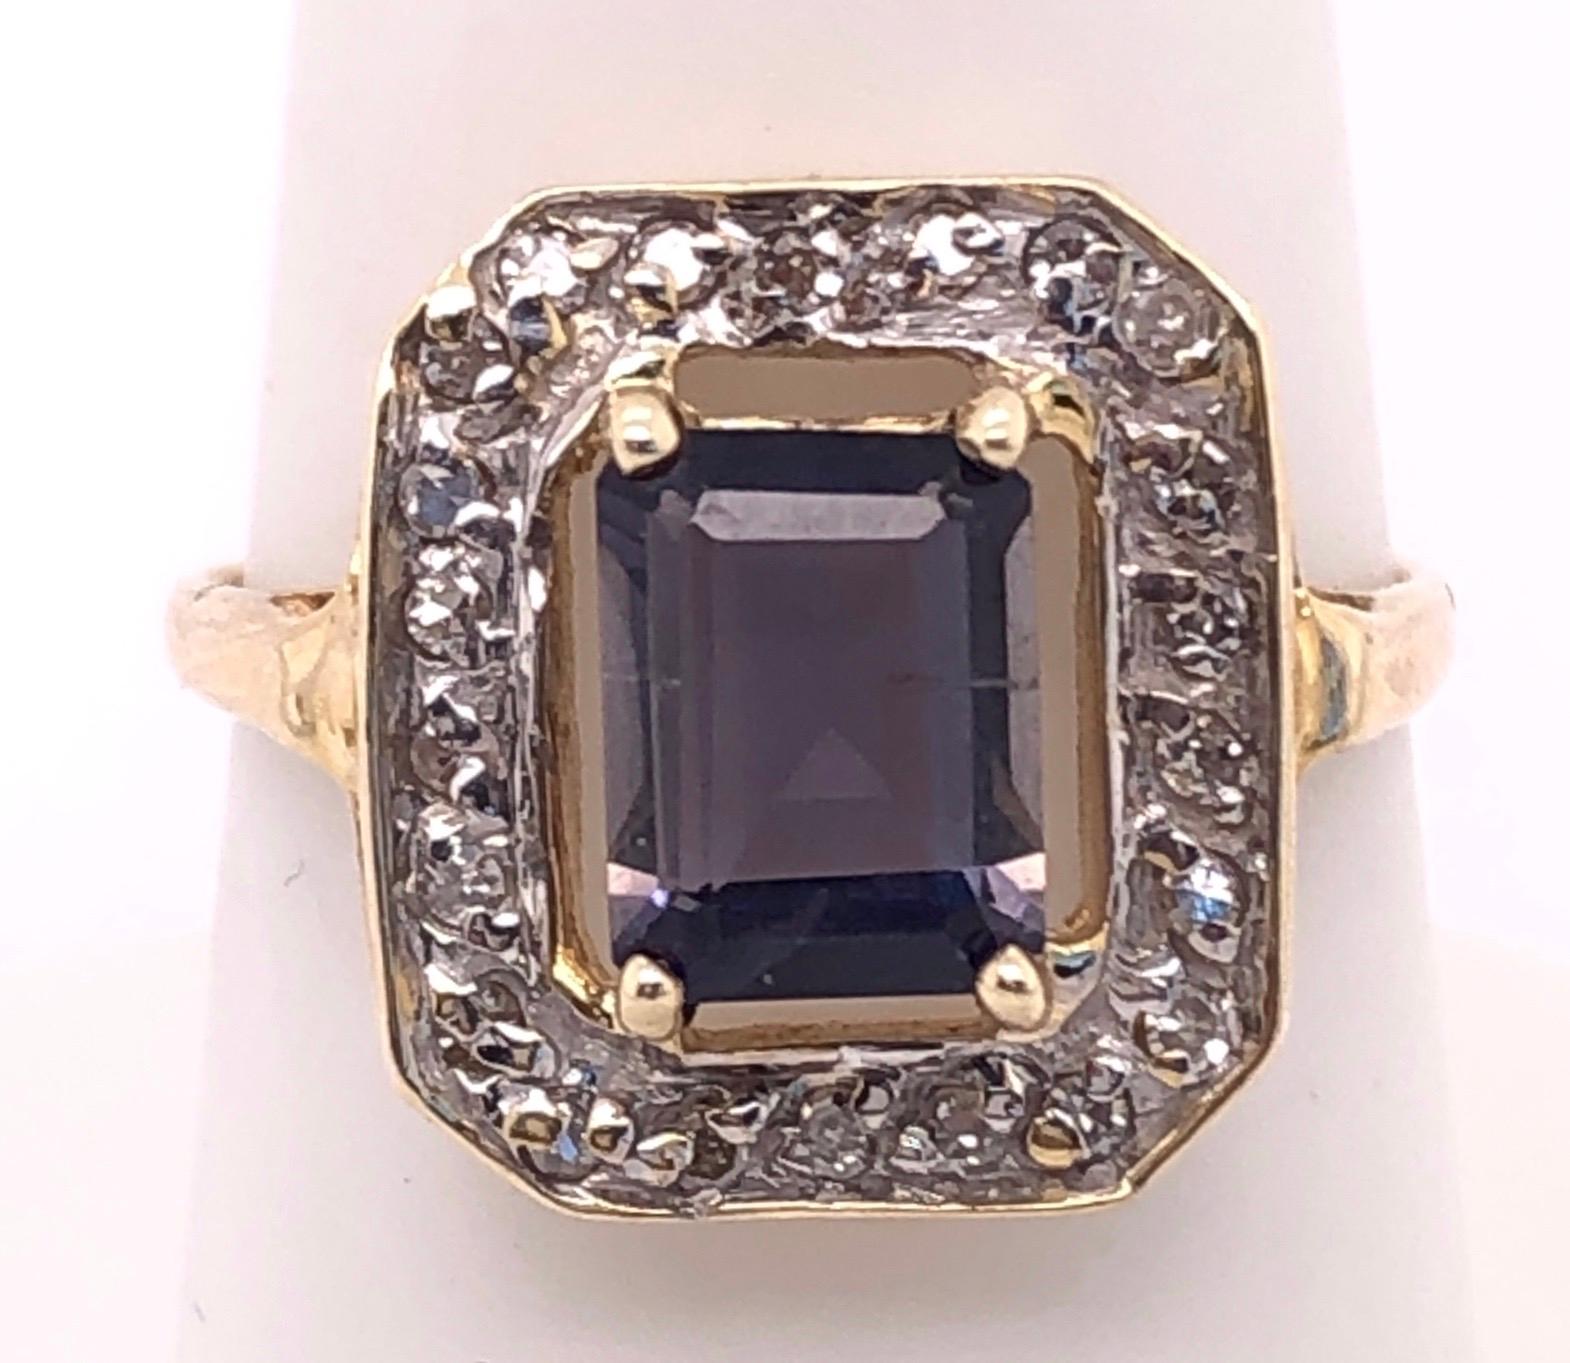 14 Karat Yellow Gold Ring Semi Precious Solitaire With Diamond Accents Size 7.5.
The diamonds are set in white gold.
0.16 total diamond weight.
3.33 grams total weight.